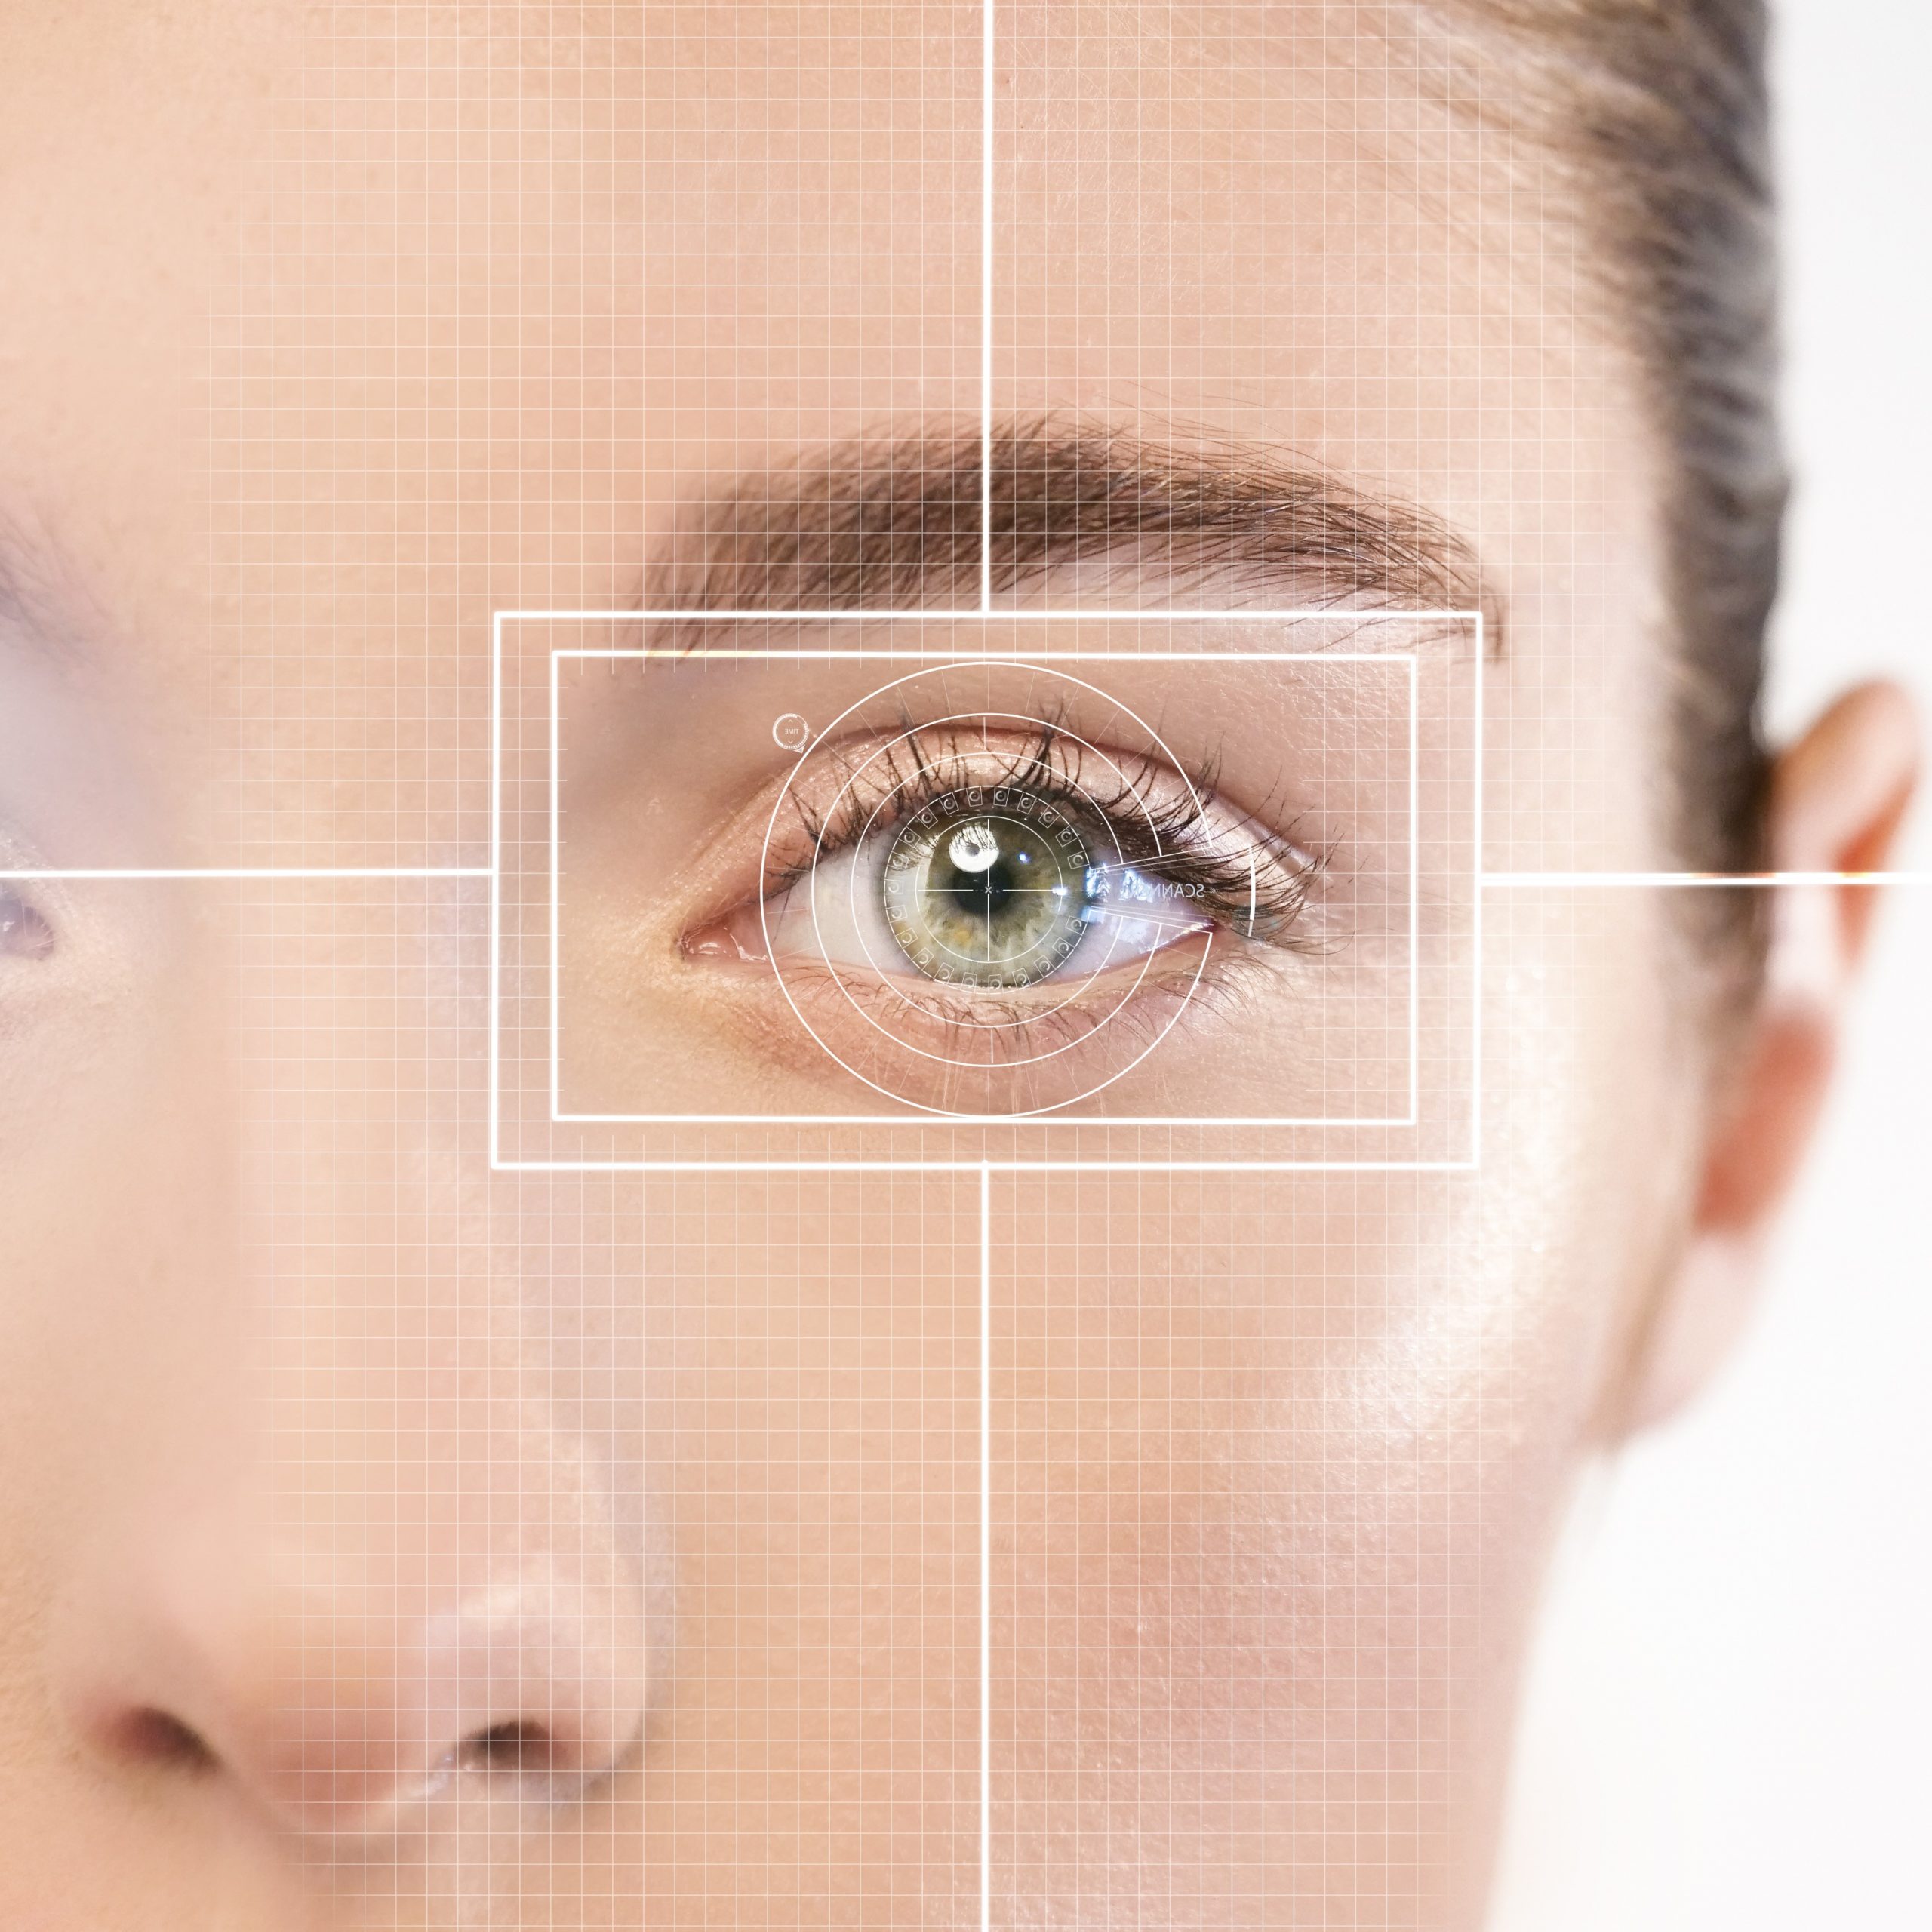 Futuristic and technological scanning of the eye of a beautiful woman for scanning person